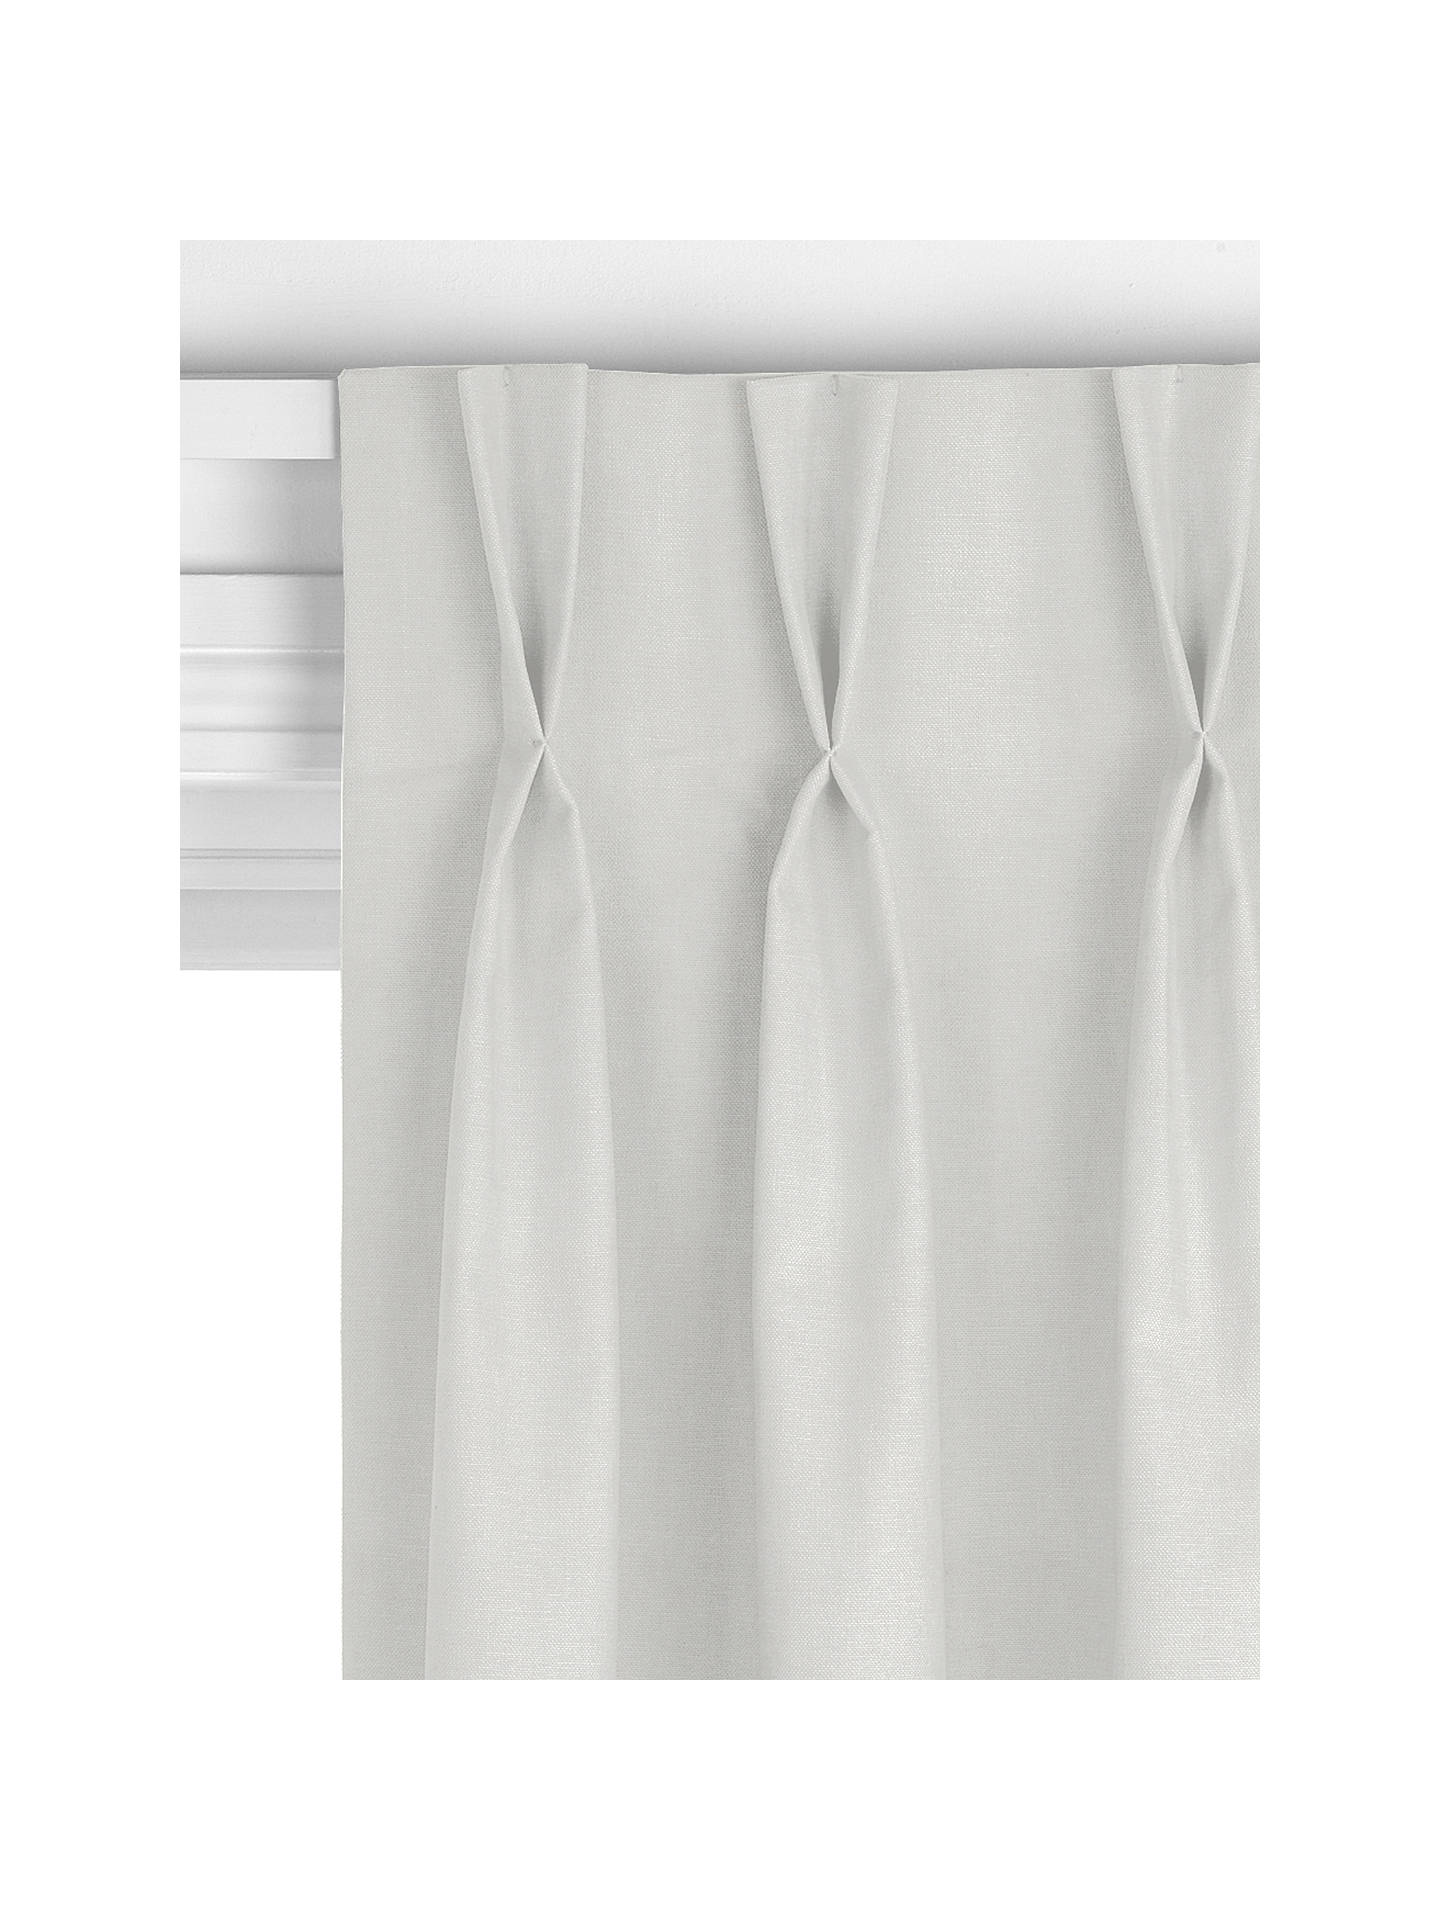 John Lewis Linen Look Made to Measure Curtains, Marshmallow